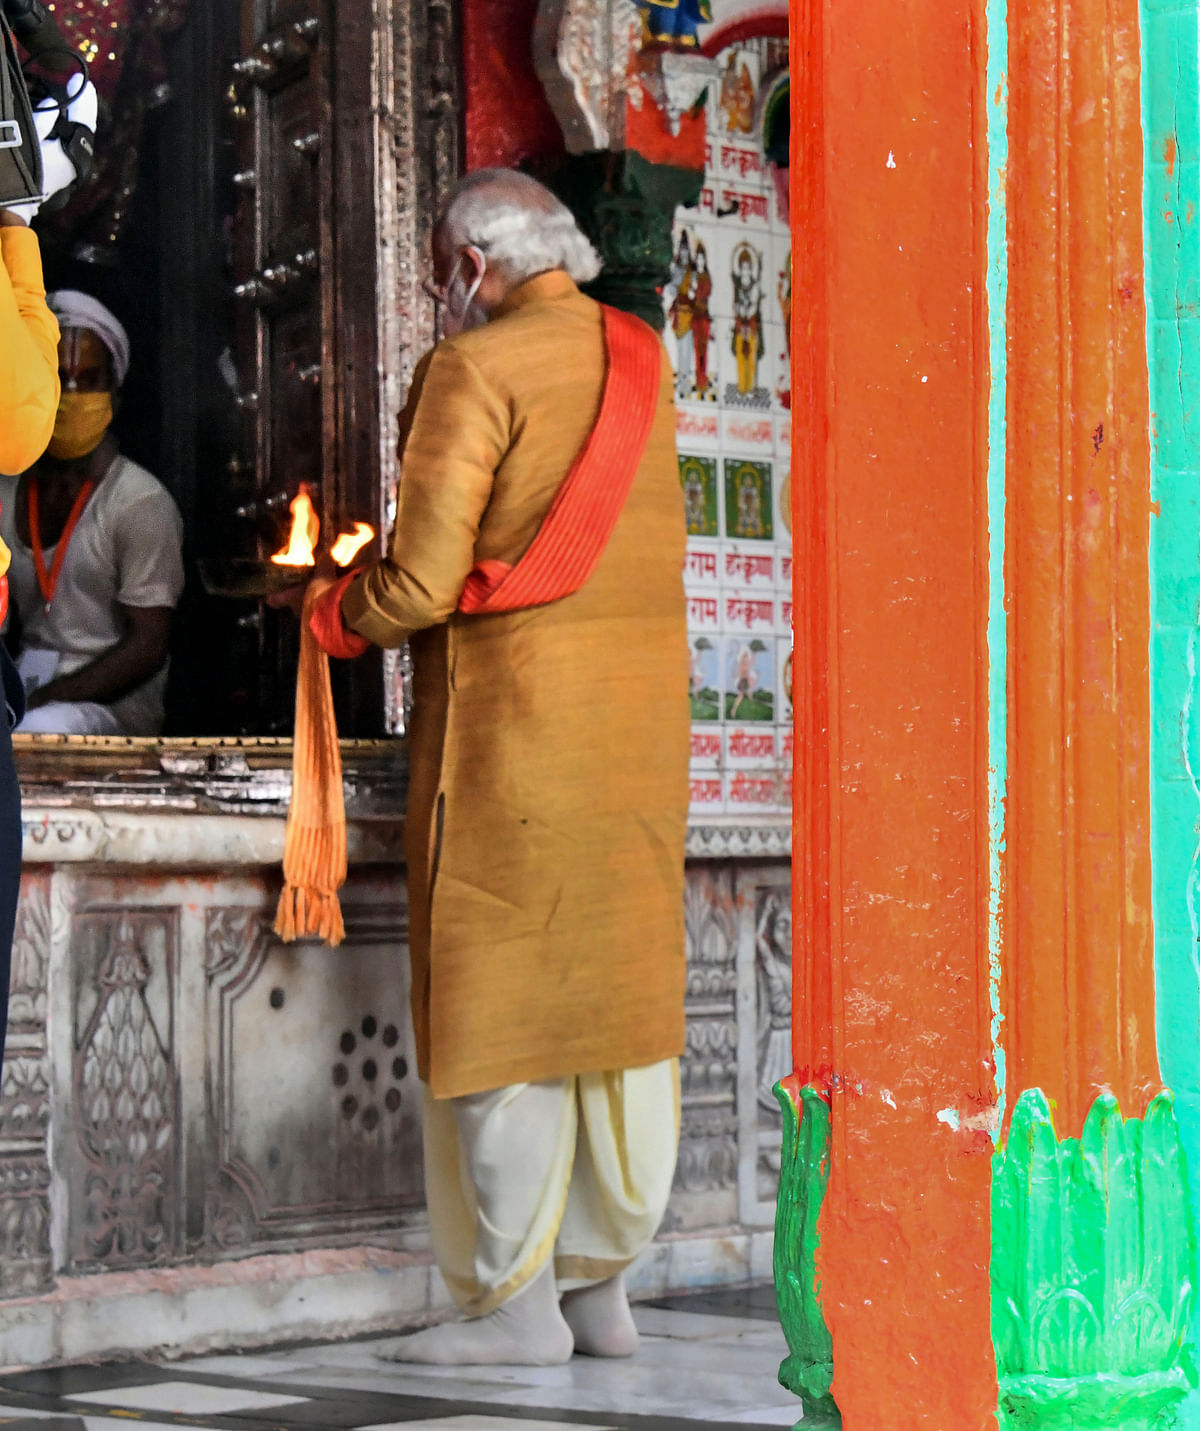 Prime Minister Narendra Modi offers prayers at the Hanumangarhi temple ahead of the foundation-stone laying ceremony of the Ram temple, in Ayodhya. Credit: PTI